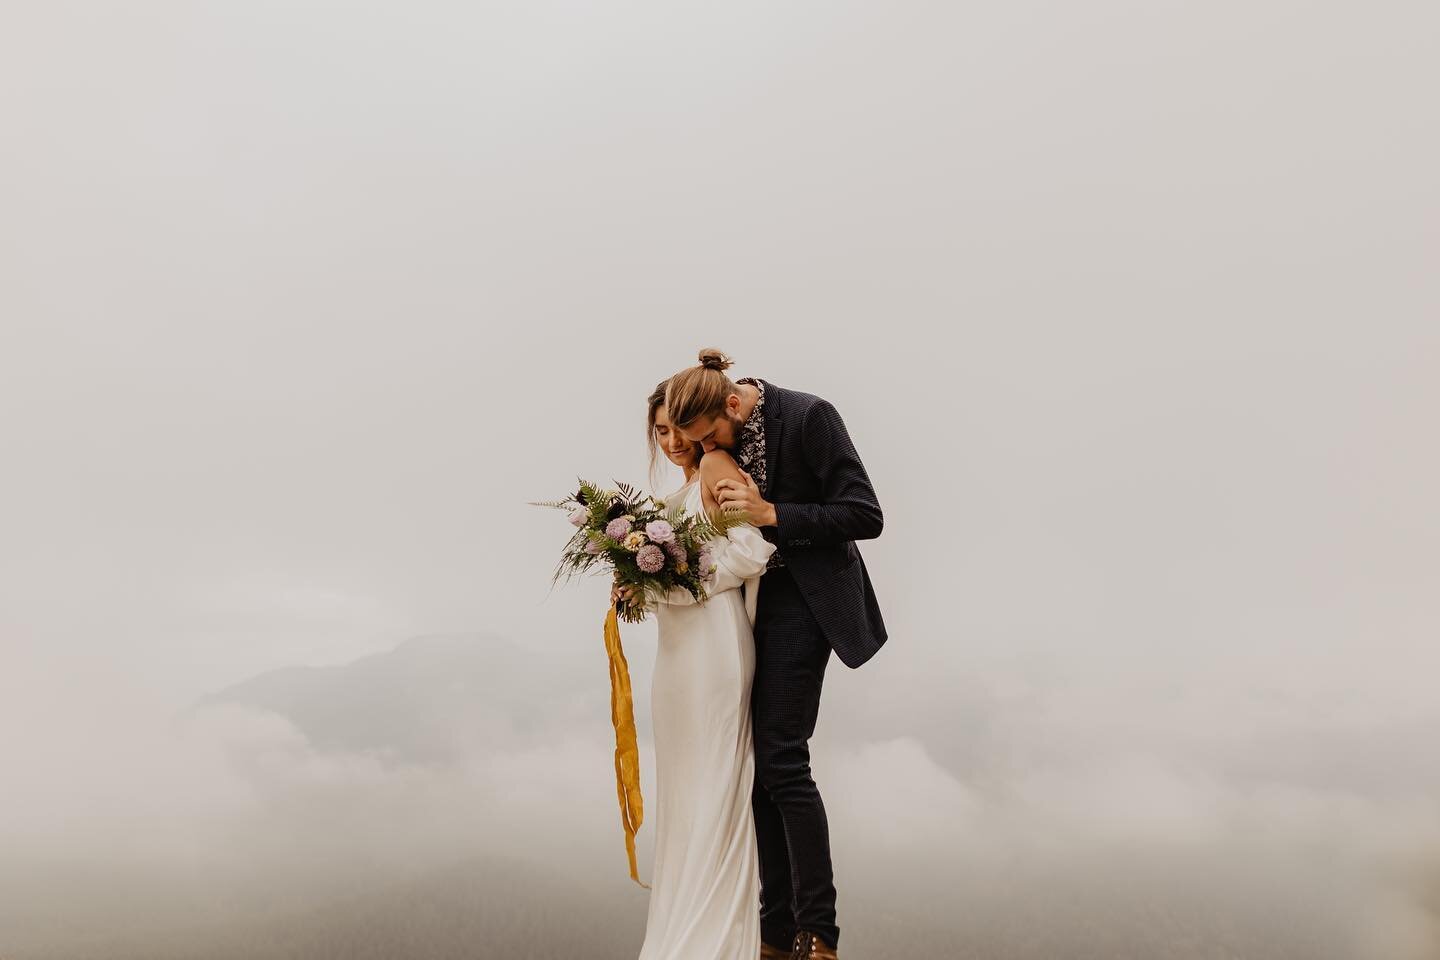 In the clouds ☁️ ✨ this was such a beautiful, peaceful morning for an elopement. Just chilly enough for our hike up and the fog added so much drama for the photos. 

Couple: @almaperez.jpeg @spenrol 
Shoot Coordinator: @thelightbetweenconnection
Flor